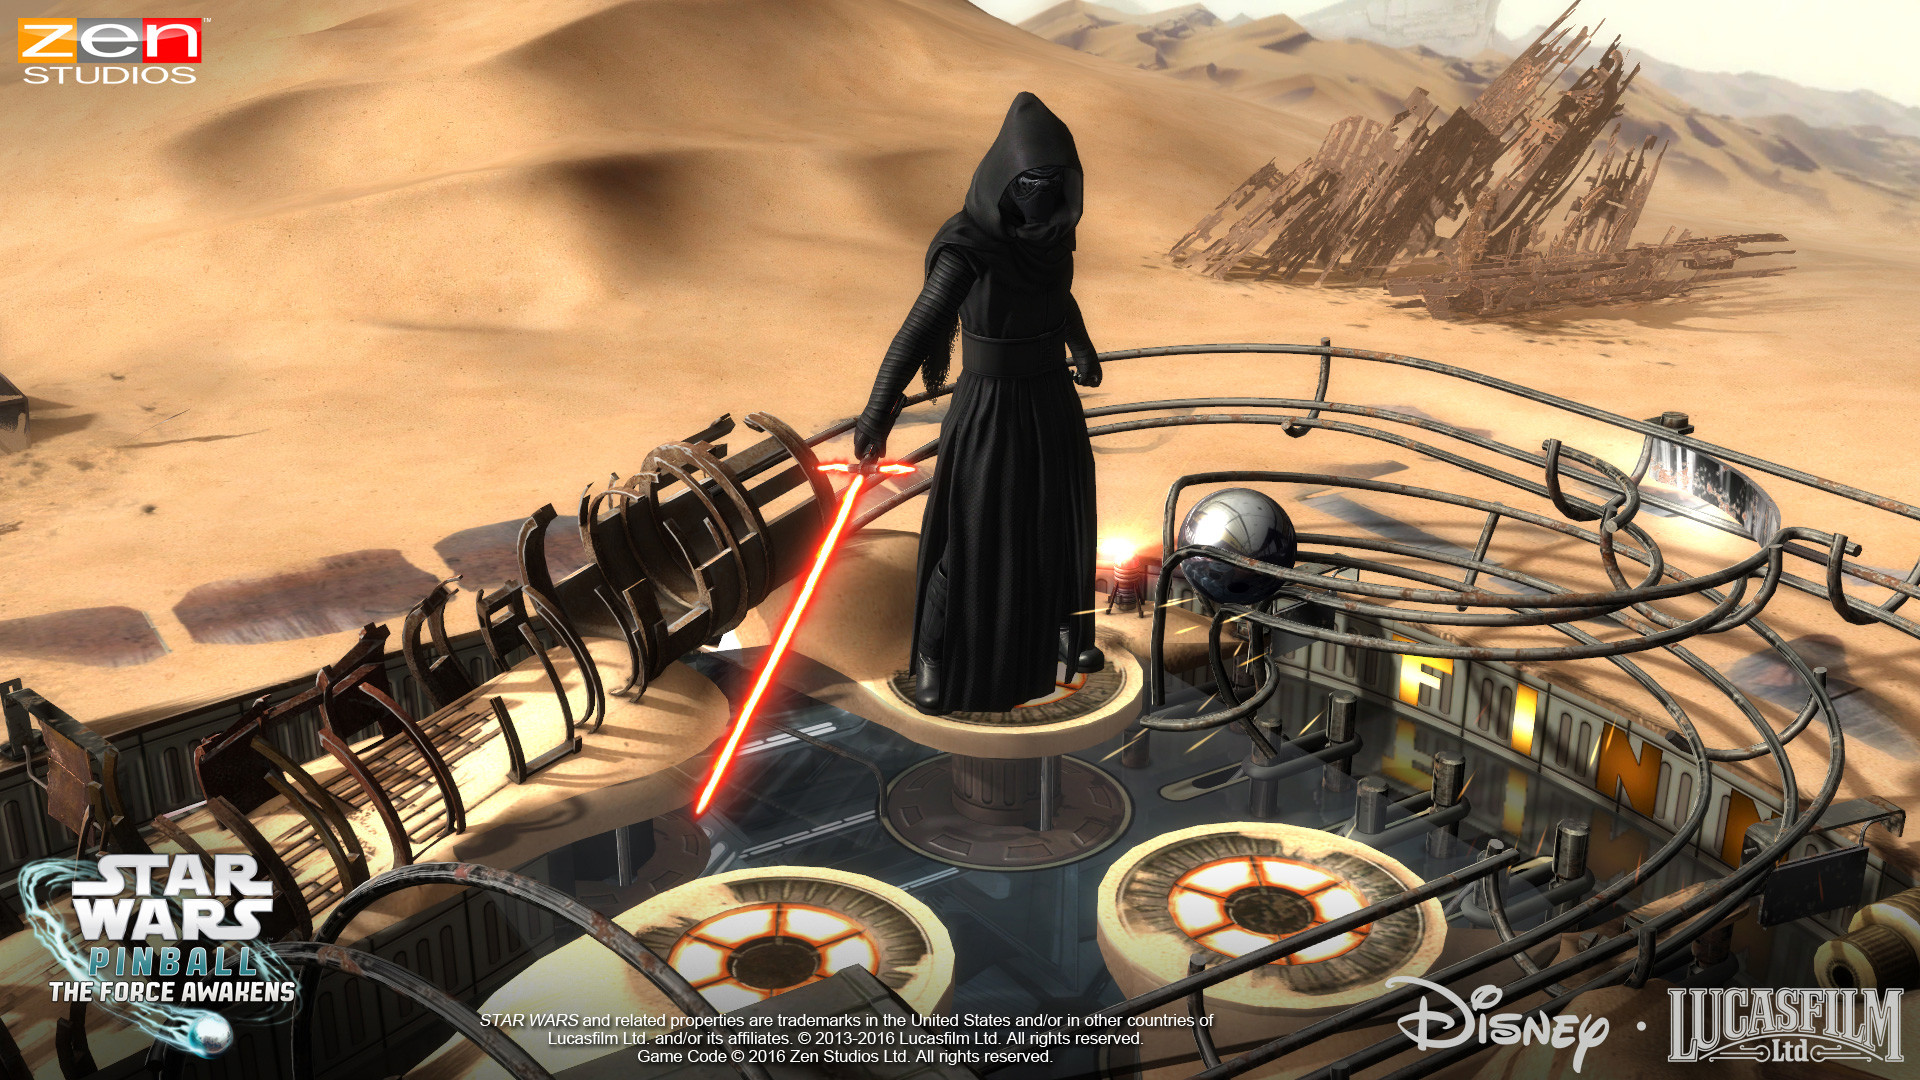 Star Wars Pinball Might of the First Order puts players in command of the First Order, tasked with extending its power to many planets in the galaxy